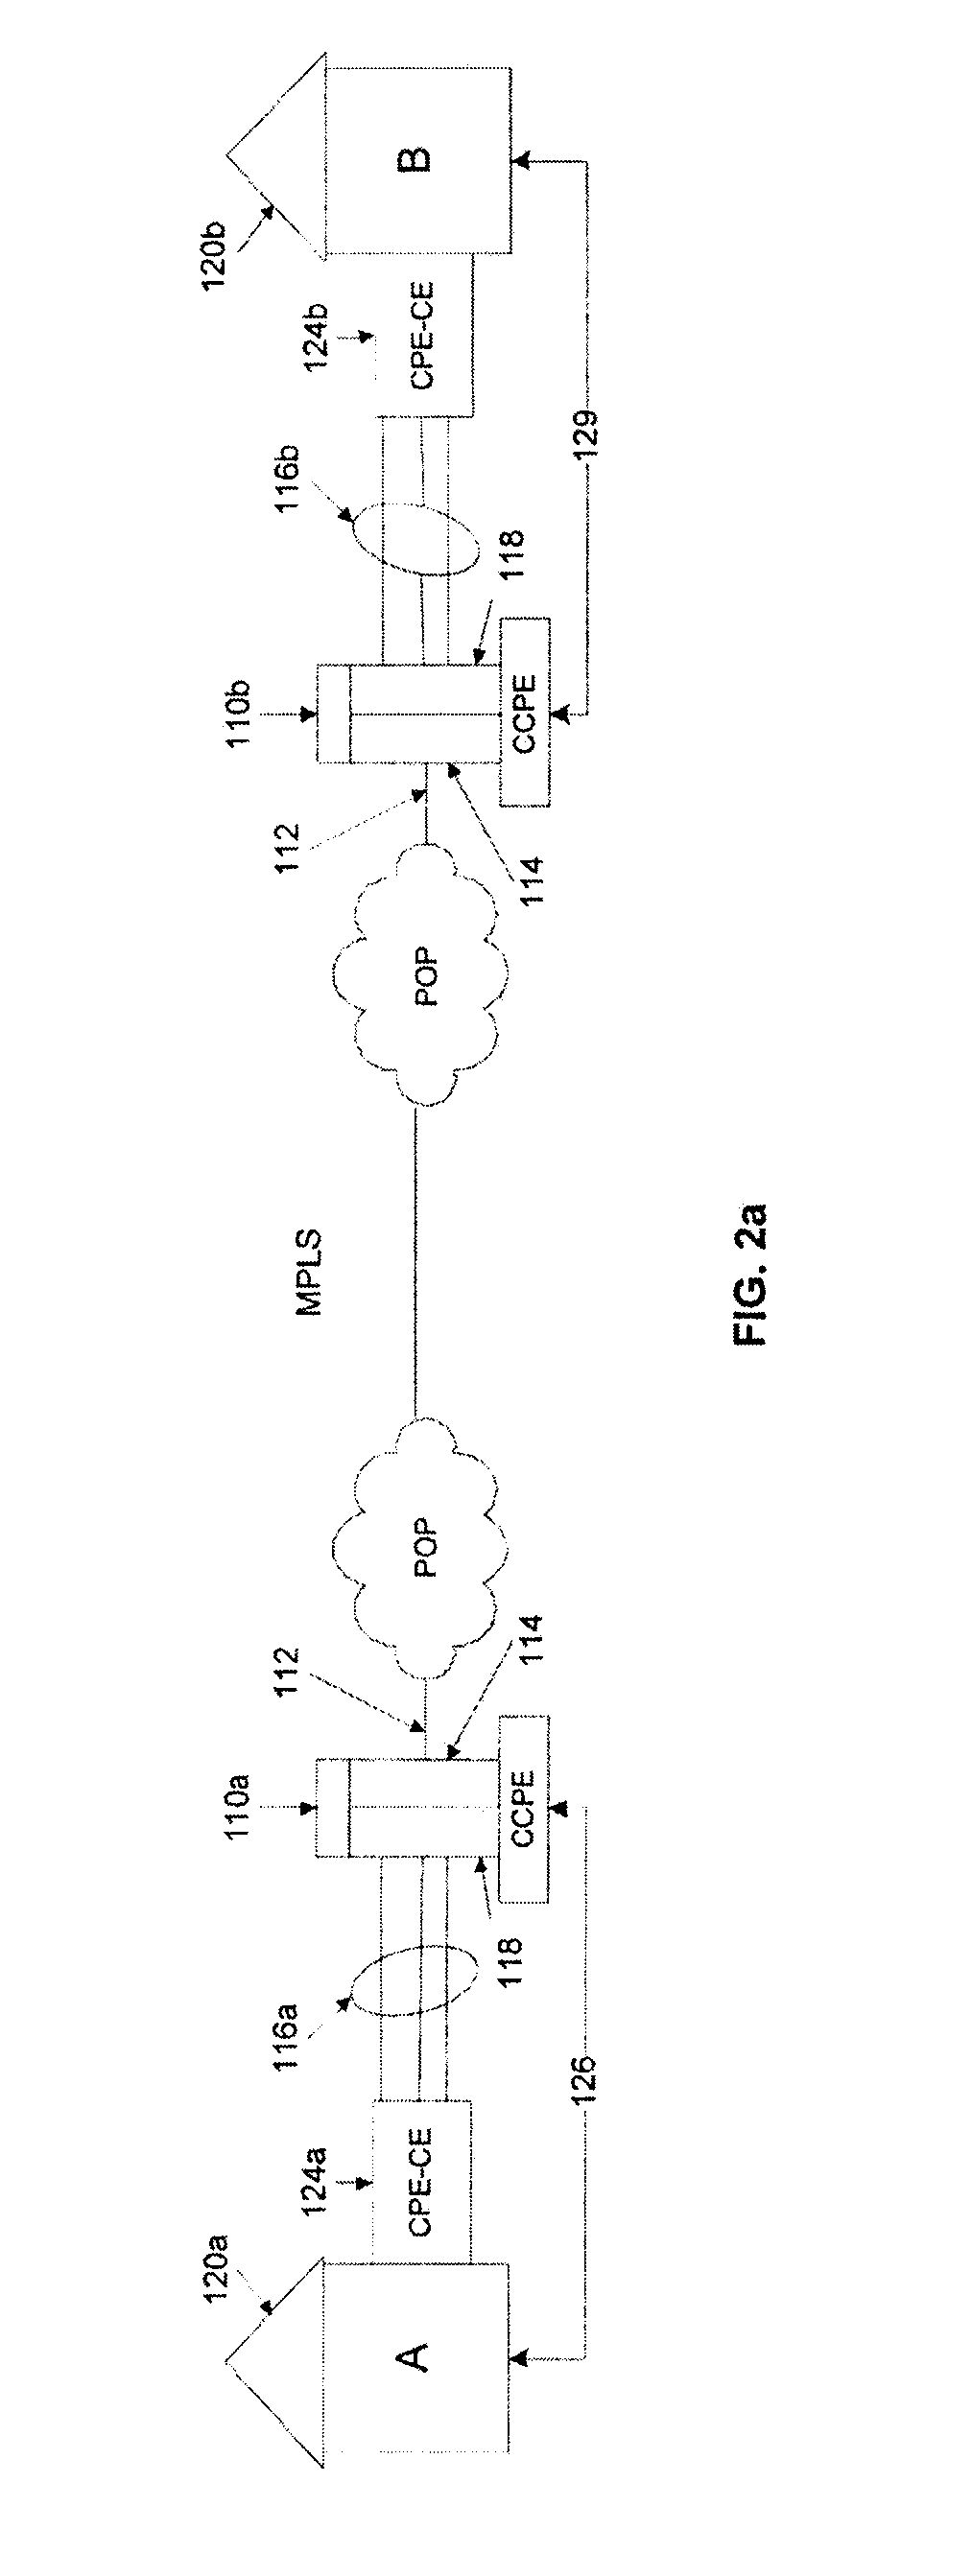 System, apparatus and method for providing a virtual network edge and overlay